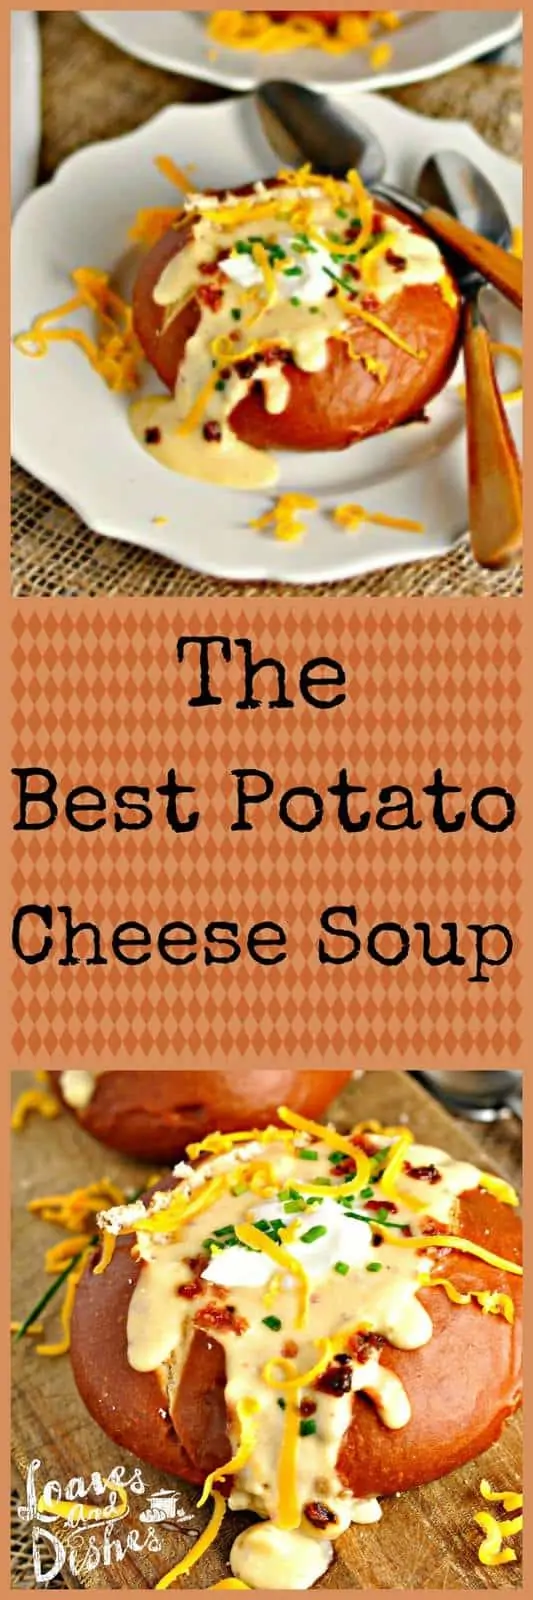 Warm up with a hot bowl of Potato Cheese Soup! So WORTH the effort! You won't be sorry. Comfort in a bowl. www.loavesanddishes.net